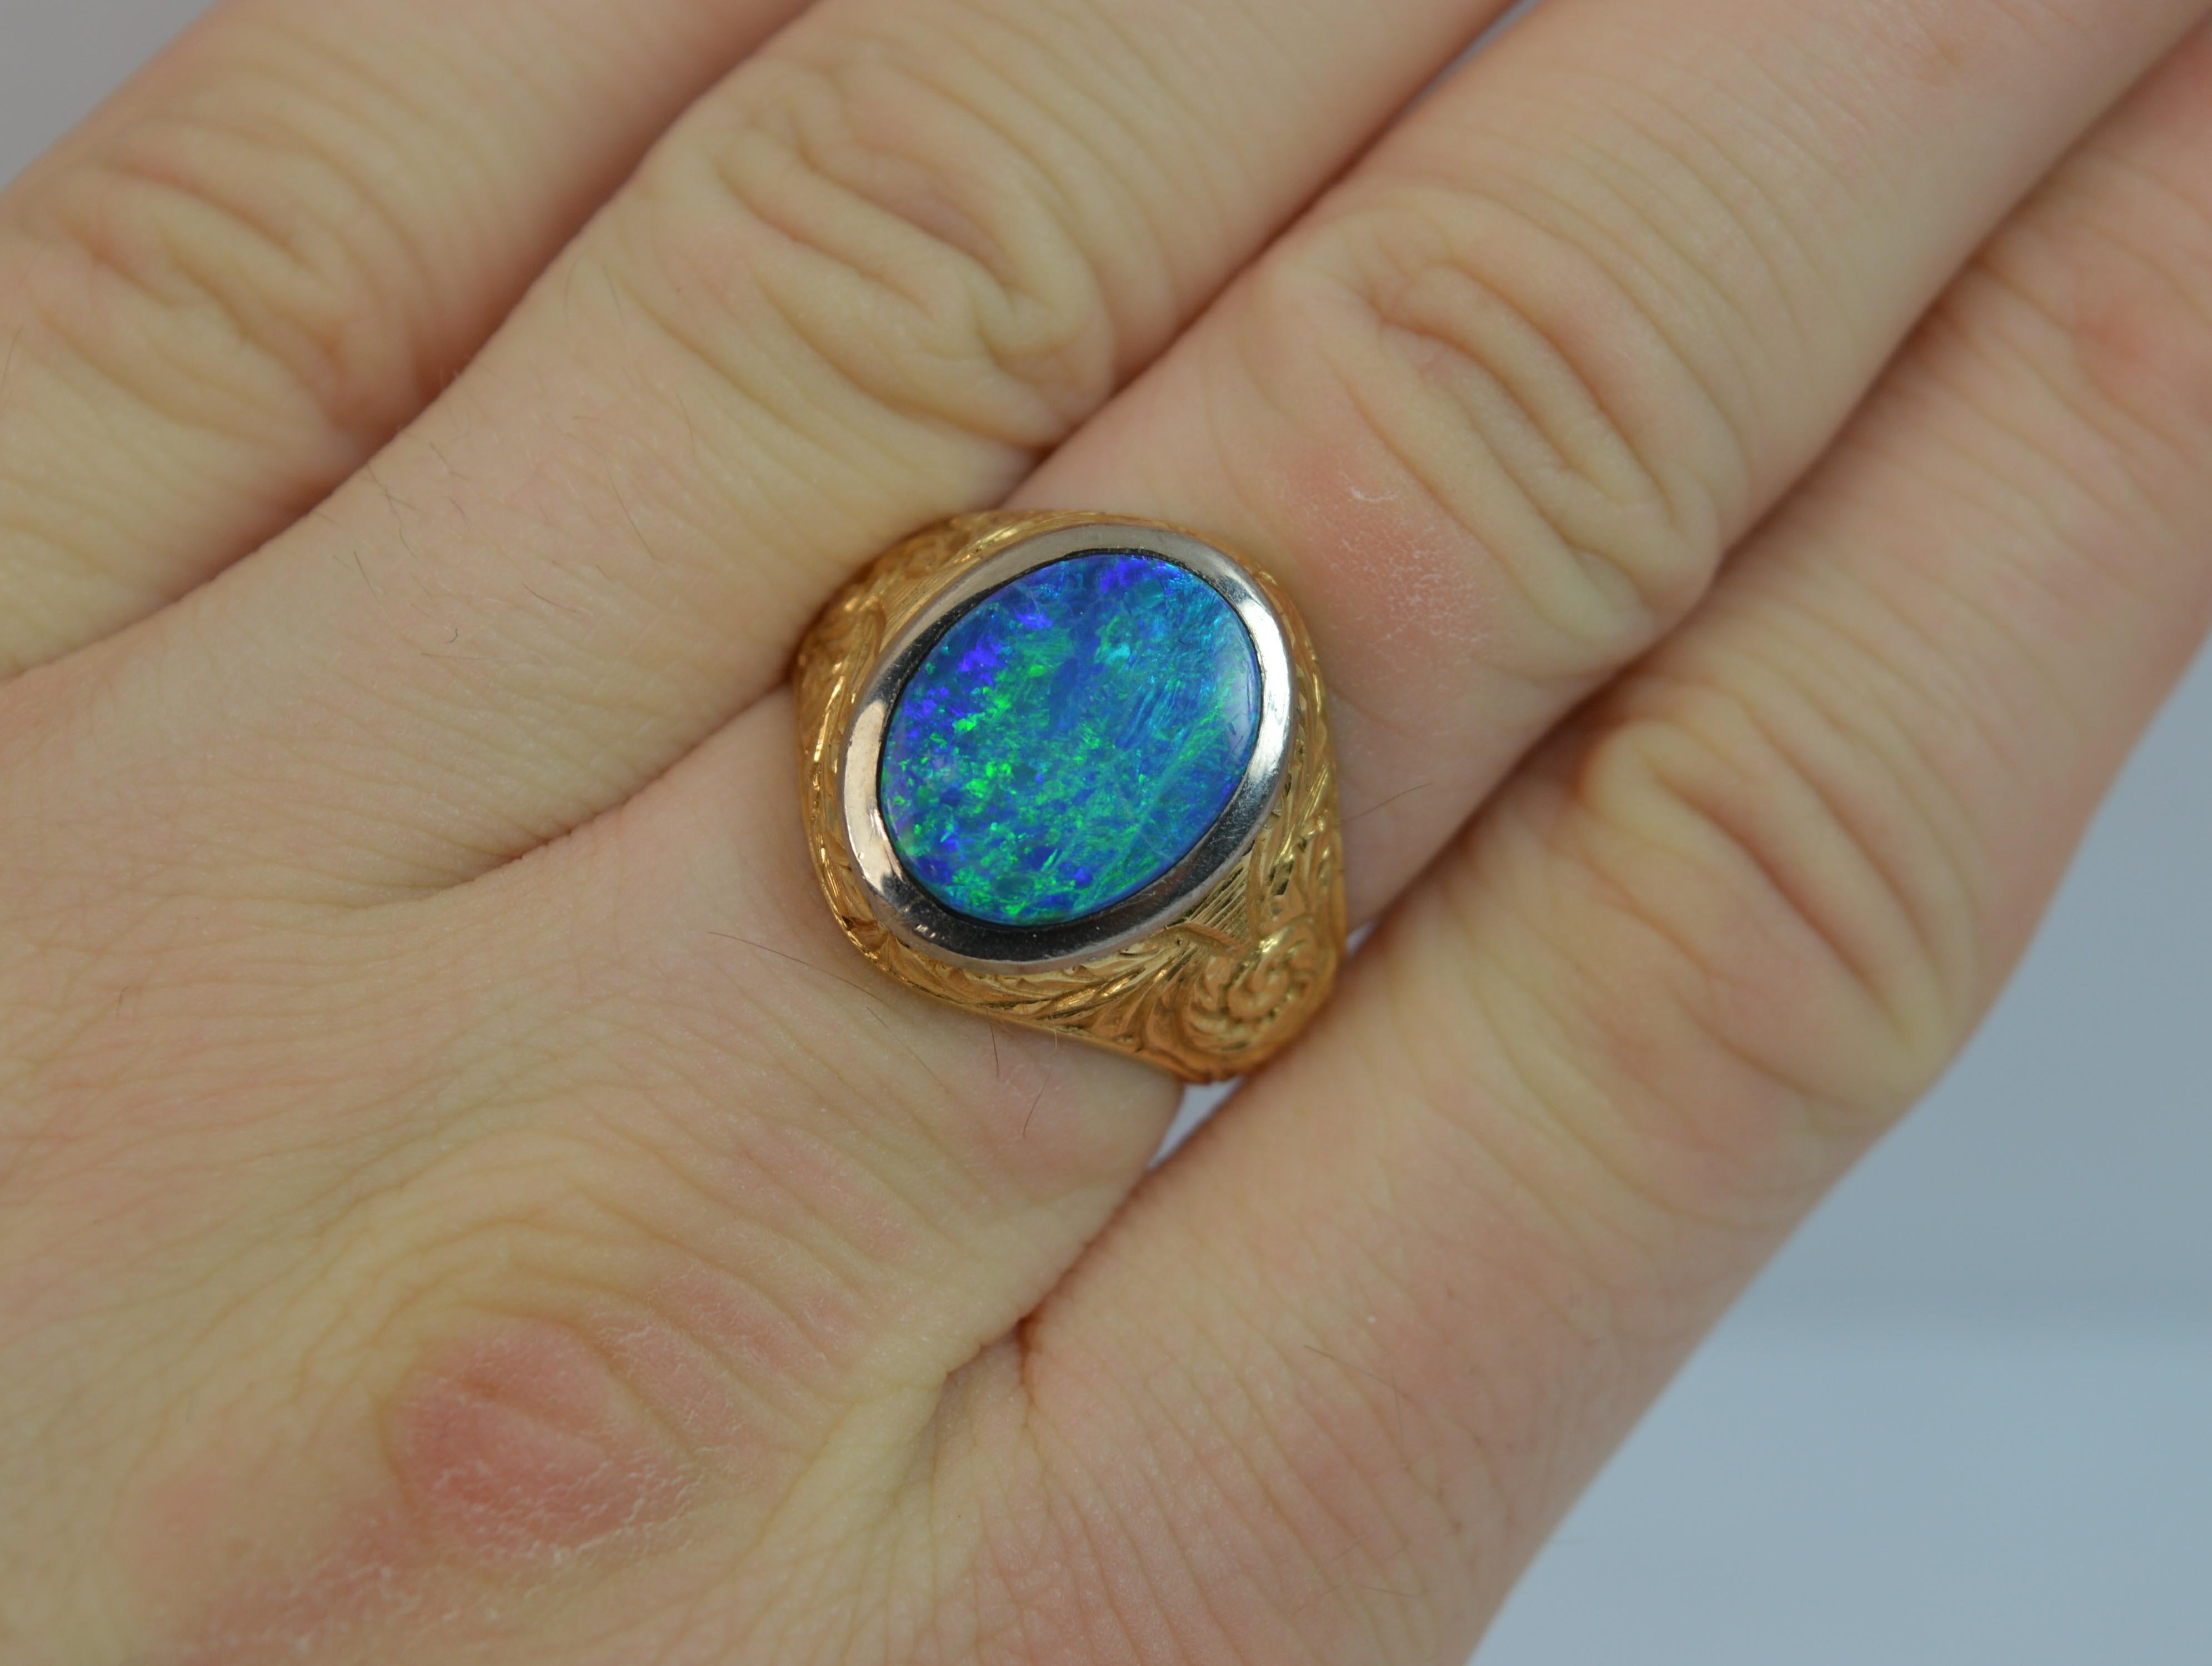 
A superb 18ct Gold and Opal doublet ring.

Signet ring design with the opal to centre measuring 10mm x 13.5mm approx.

Superb hand engraved chased finish to the shoulders and full shank.


CONDITION ; Excellent. Clean and solid shank. Crisp